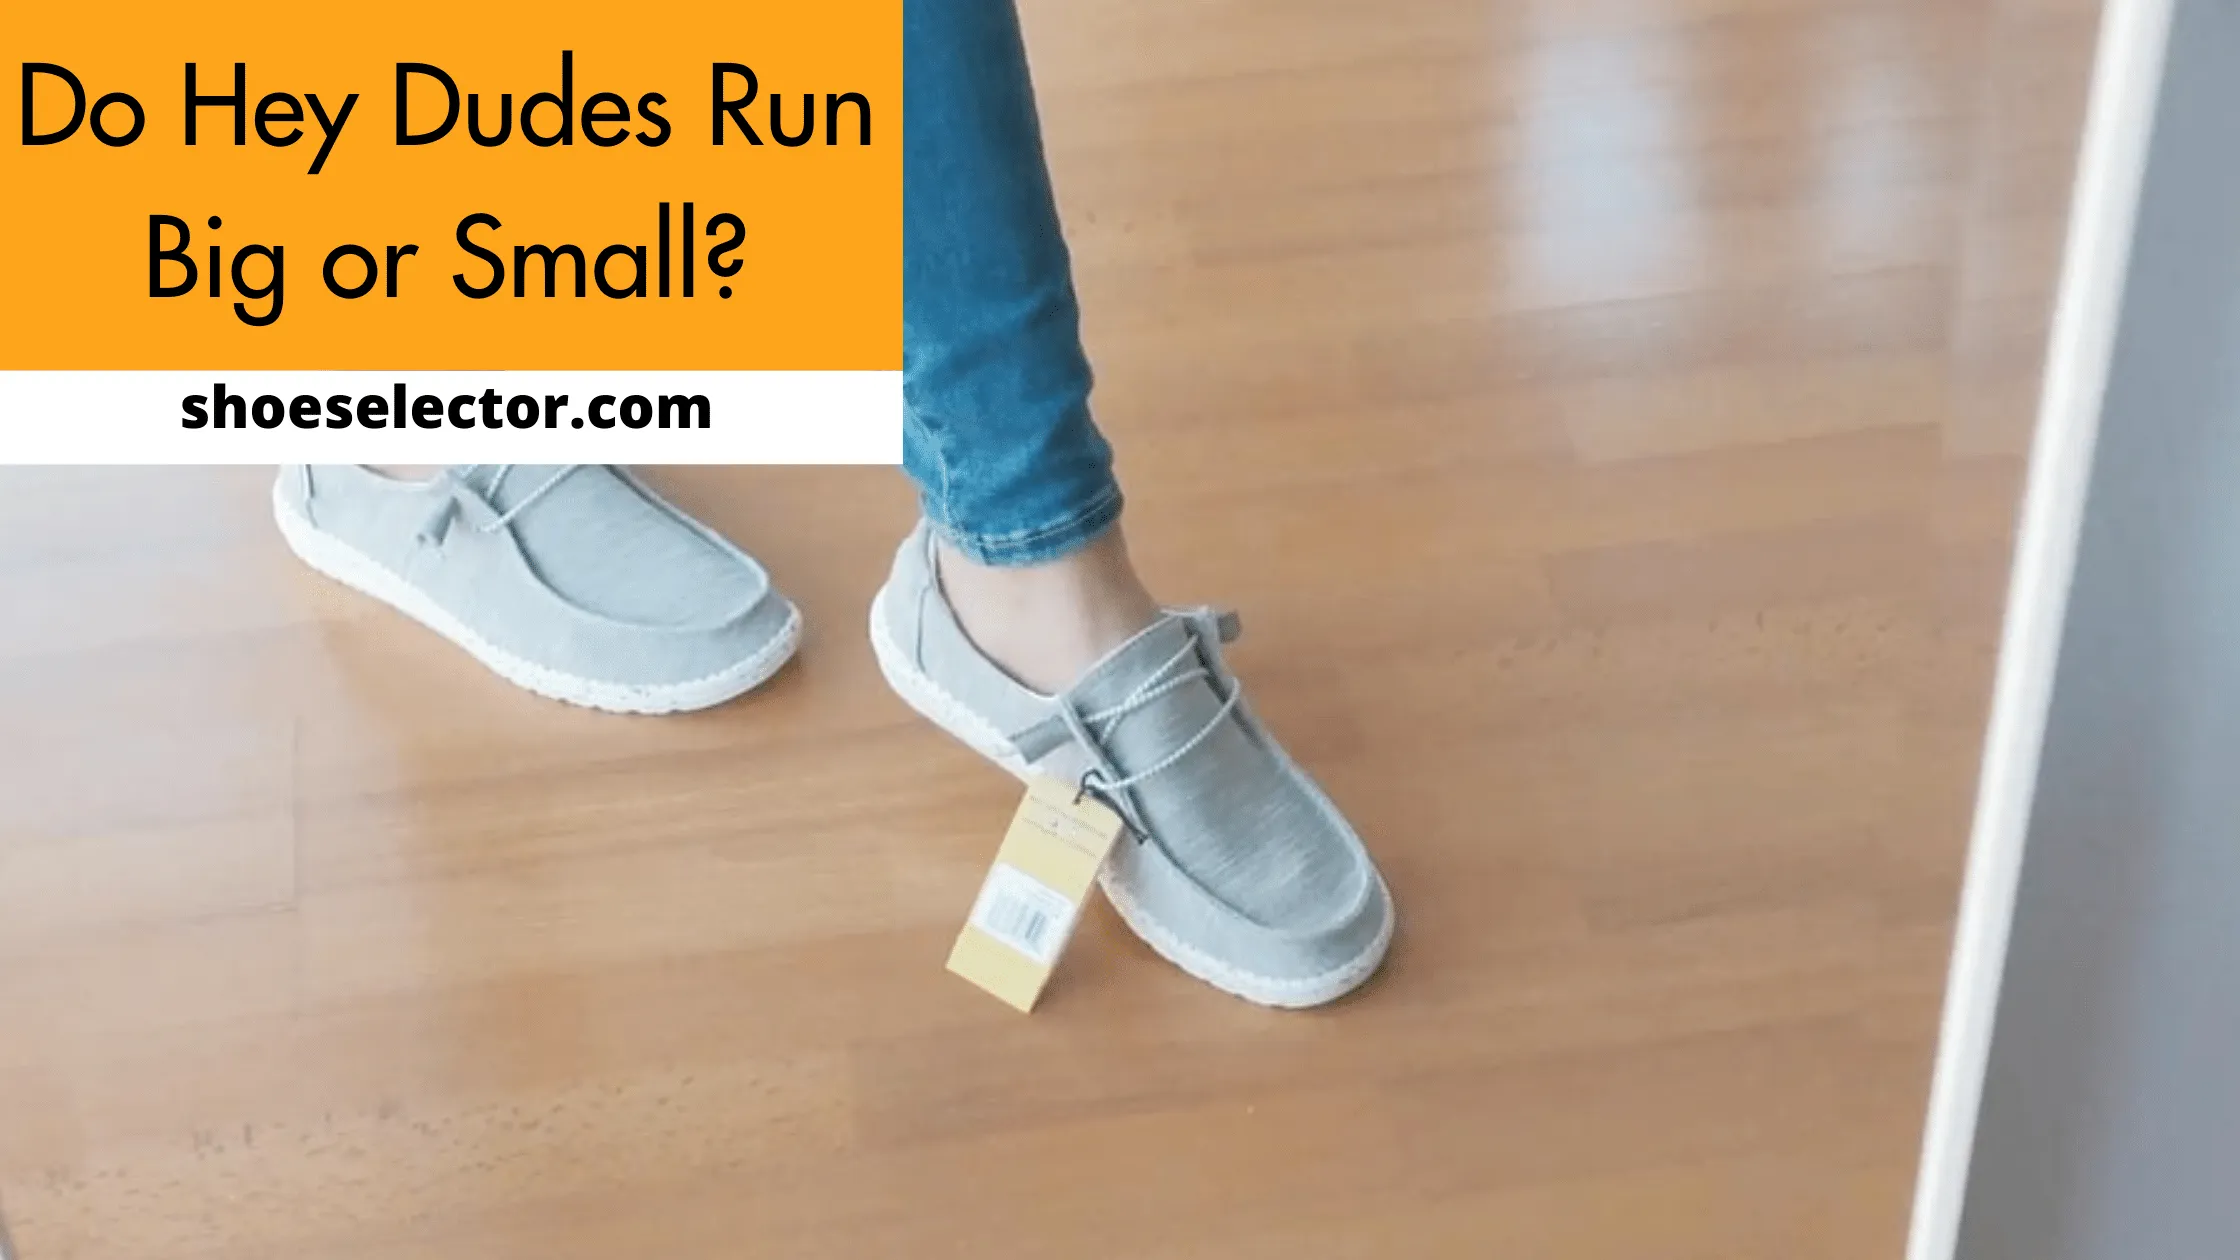 Do Hey Dudes Run Big or Small? Pro Guide